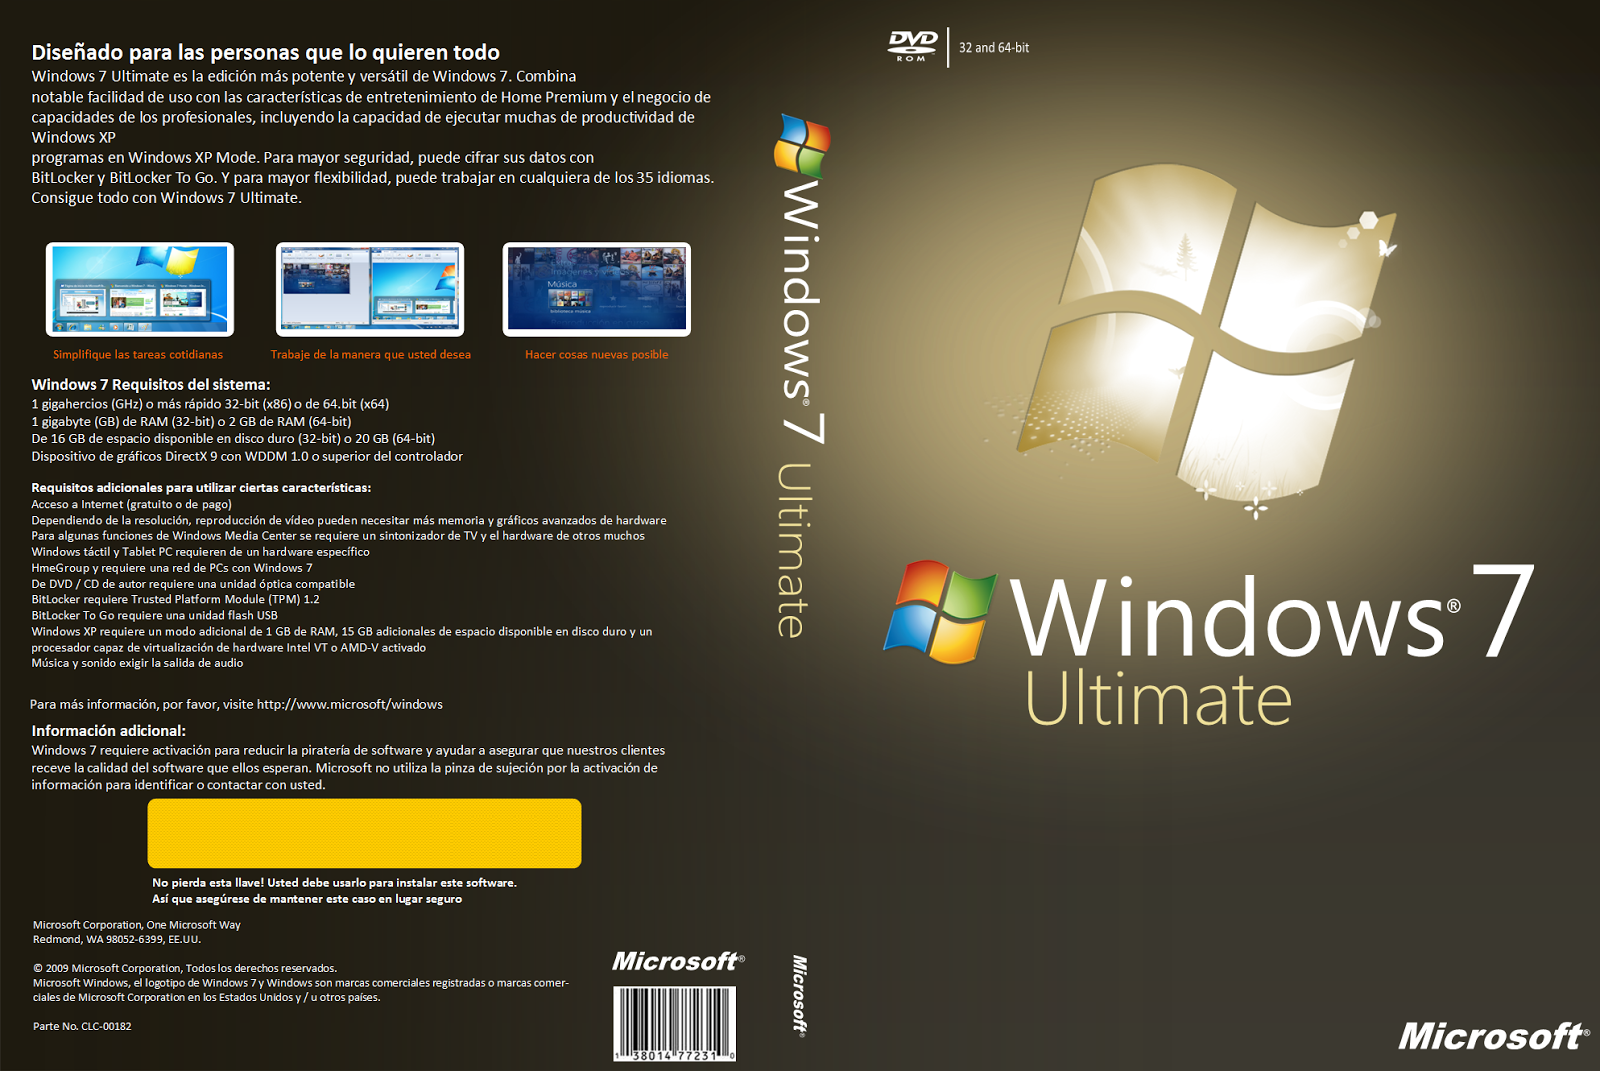 drivers for windows 7 ultimate 64 bit free download